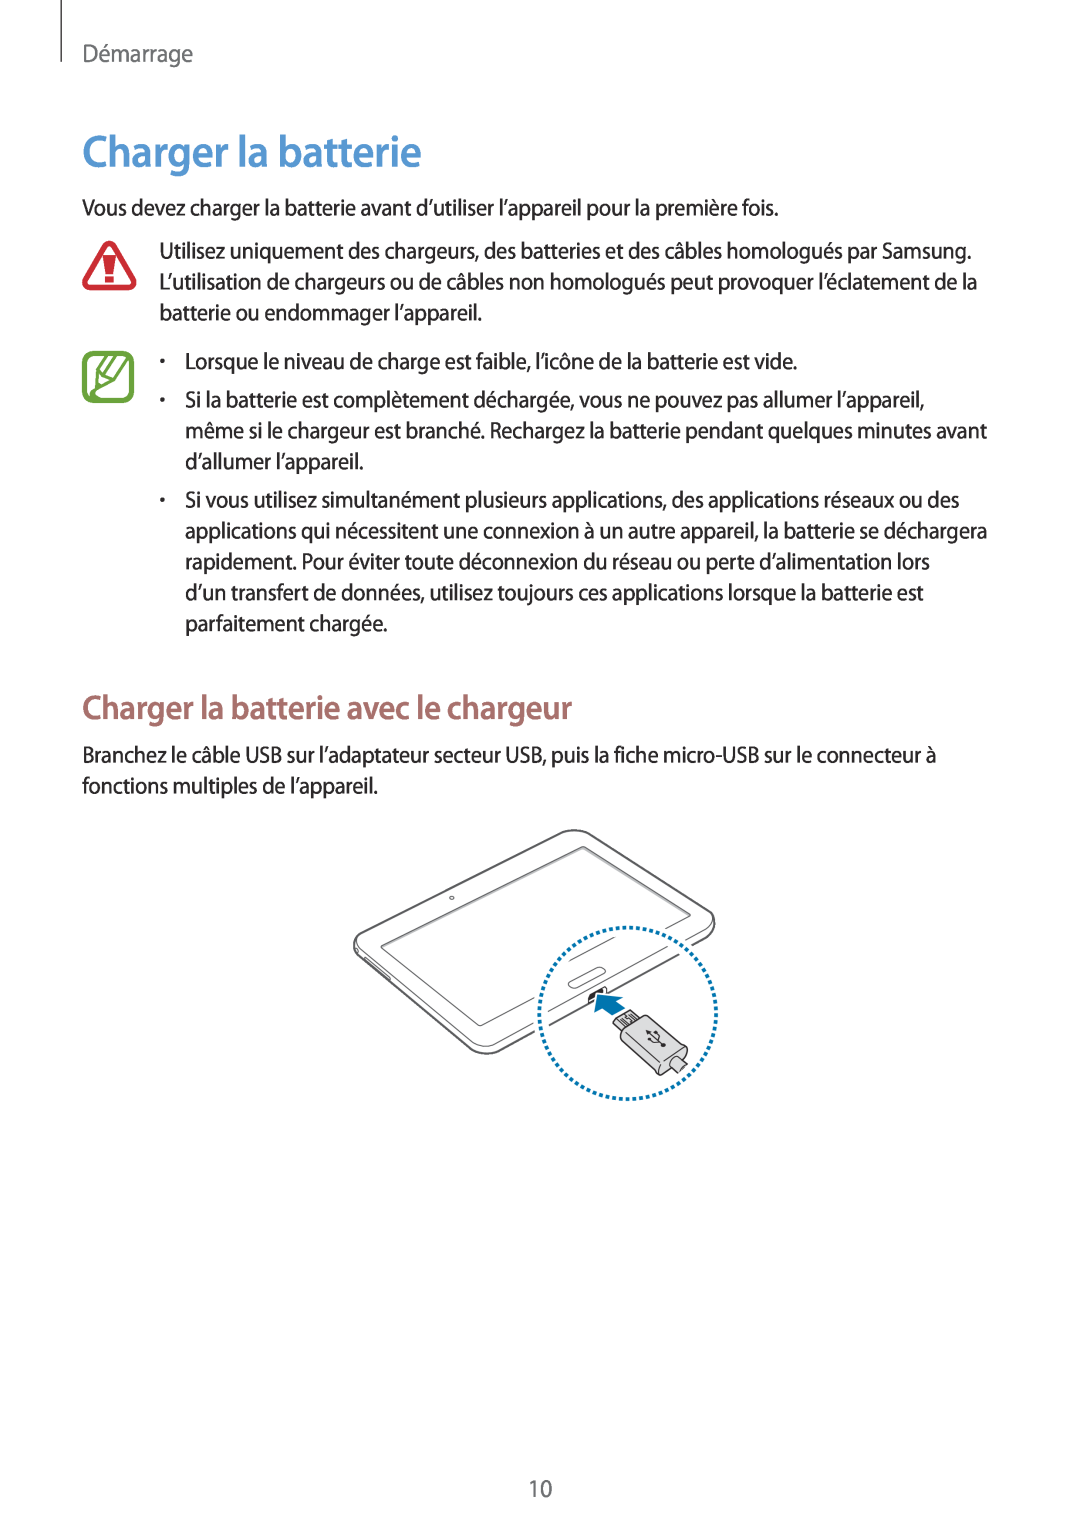 Samsung SM-T533NZWEXEF, SM-T533NYKAXEF, SM-T533NZWAXEF manual Charger la batterie avec le chargeur, Démarrage 